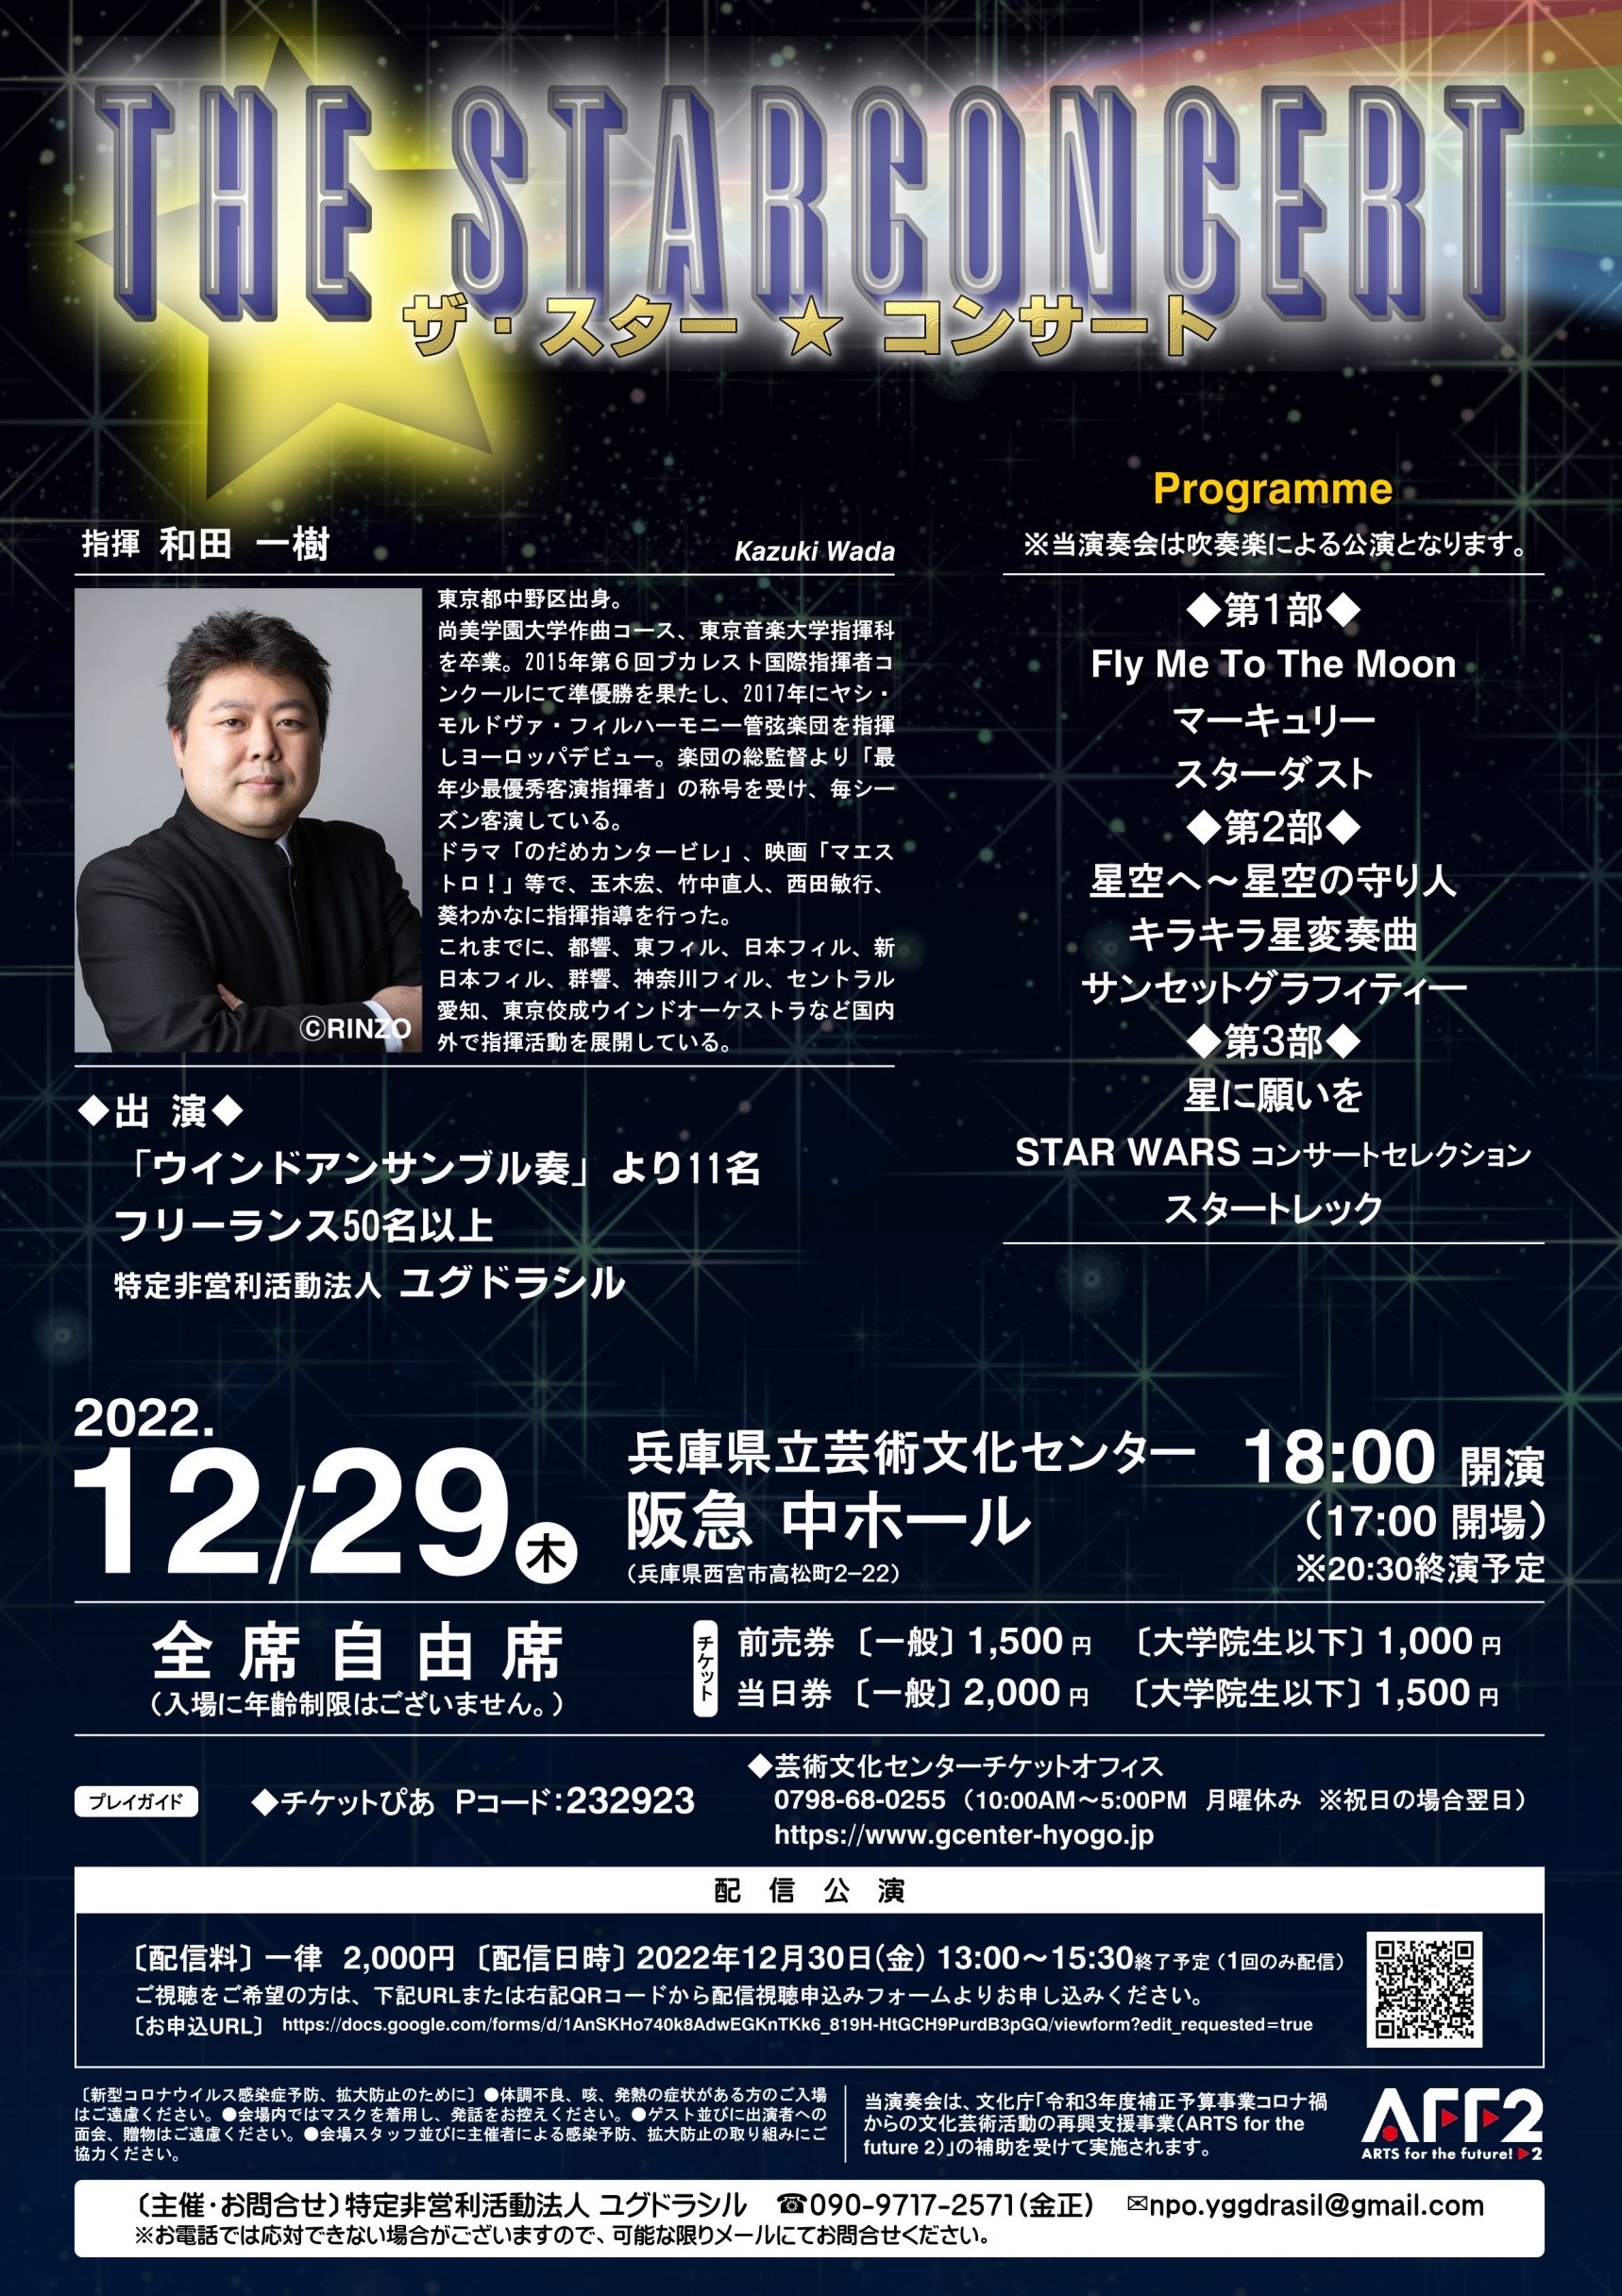 THE STAR CONCERT